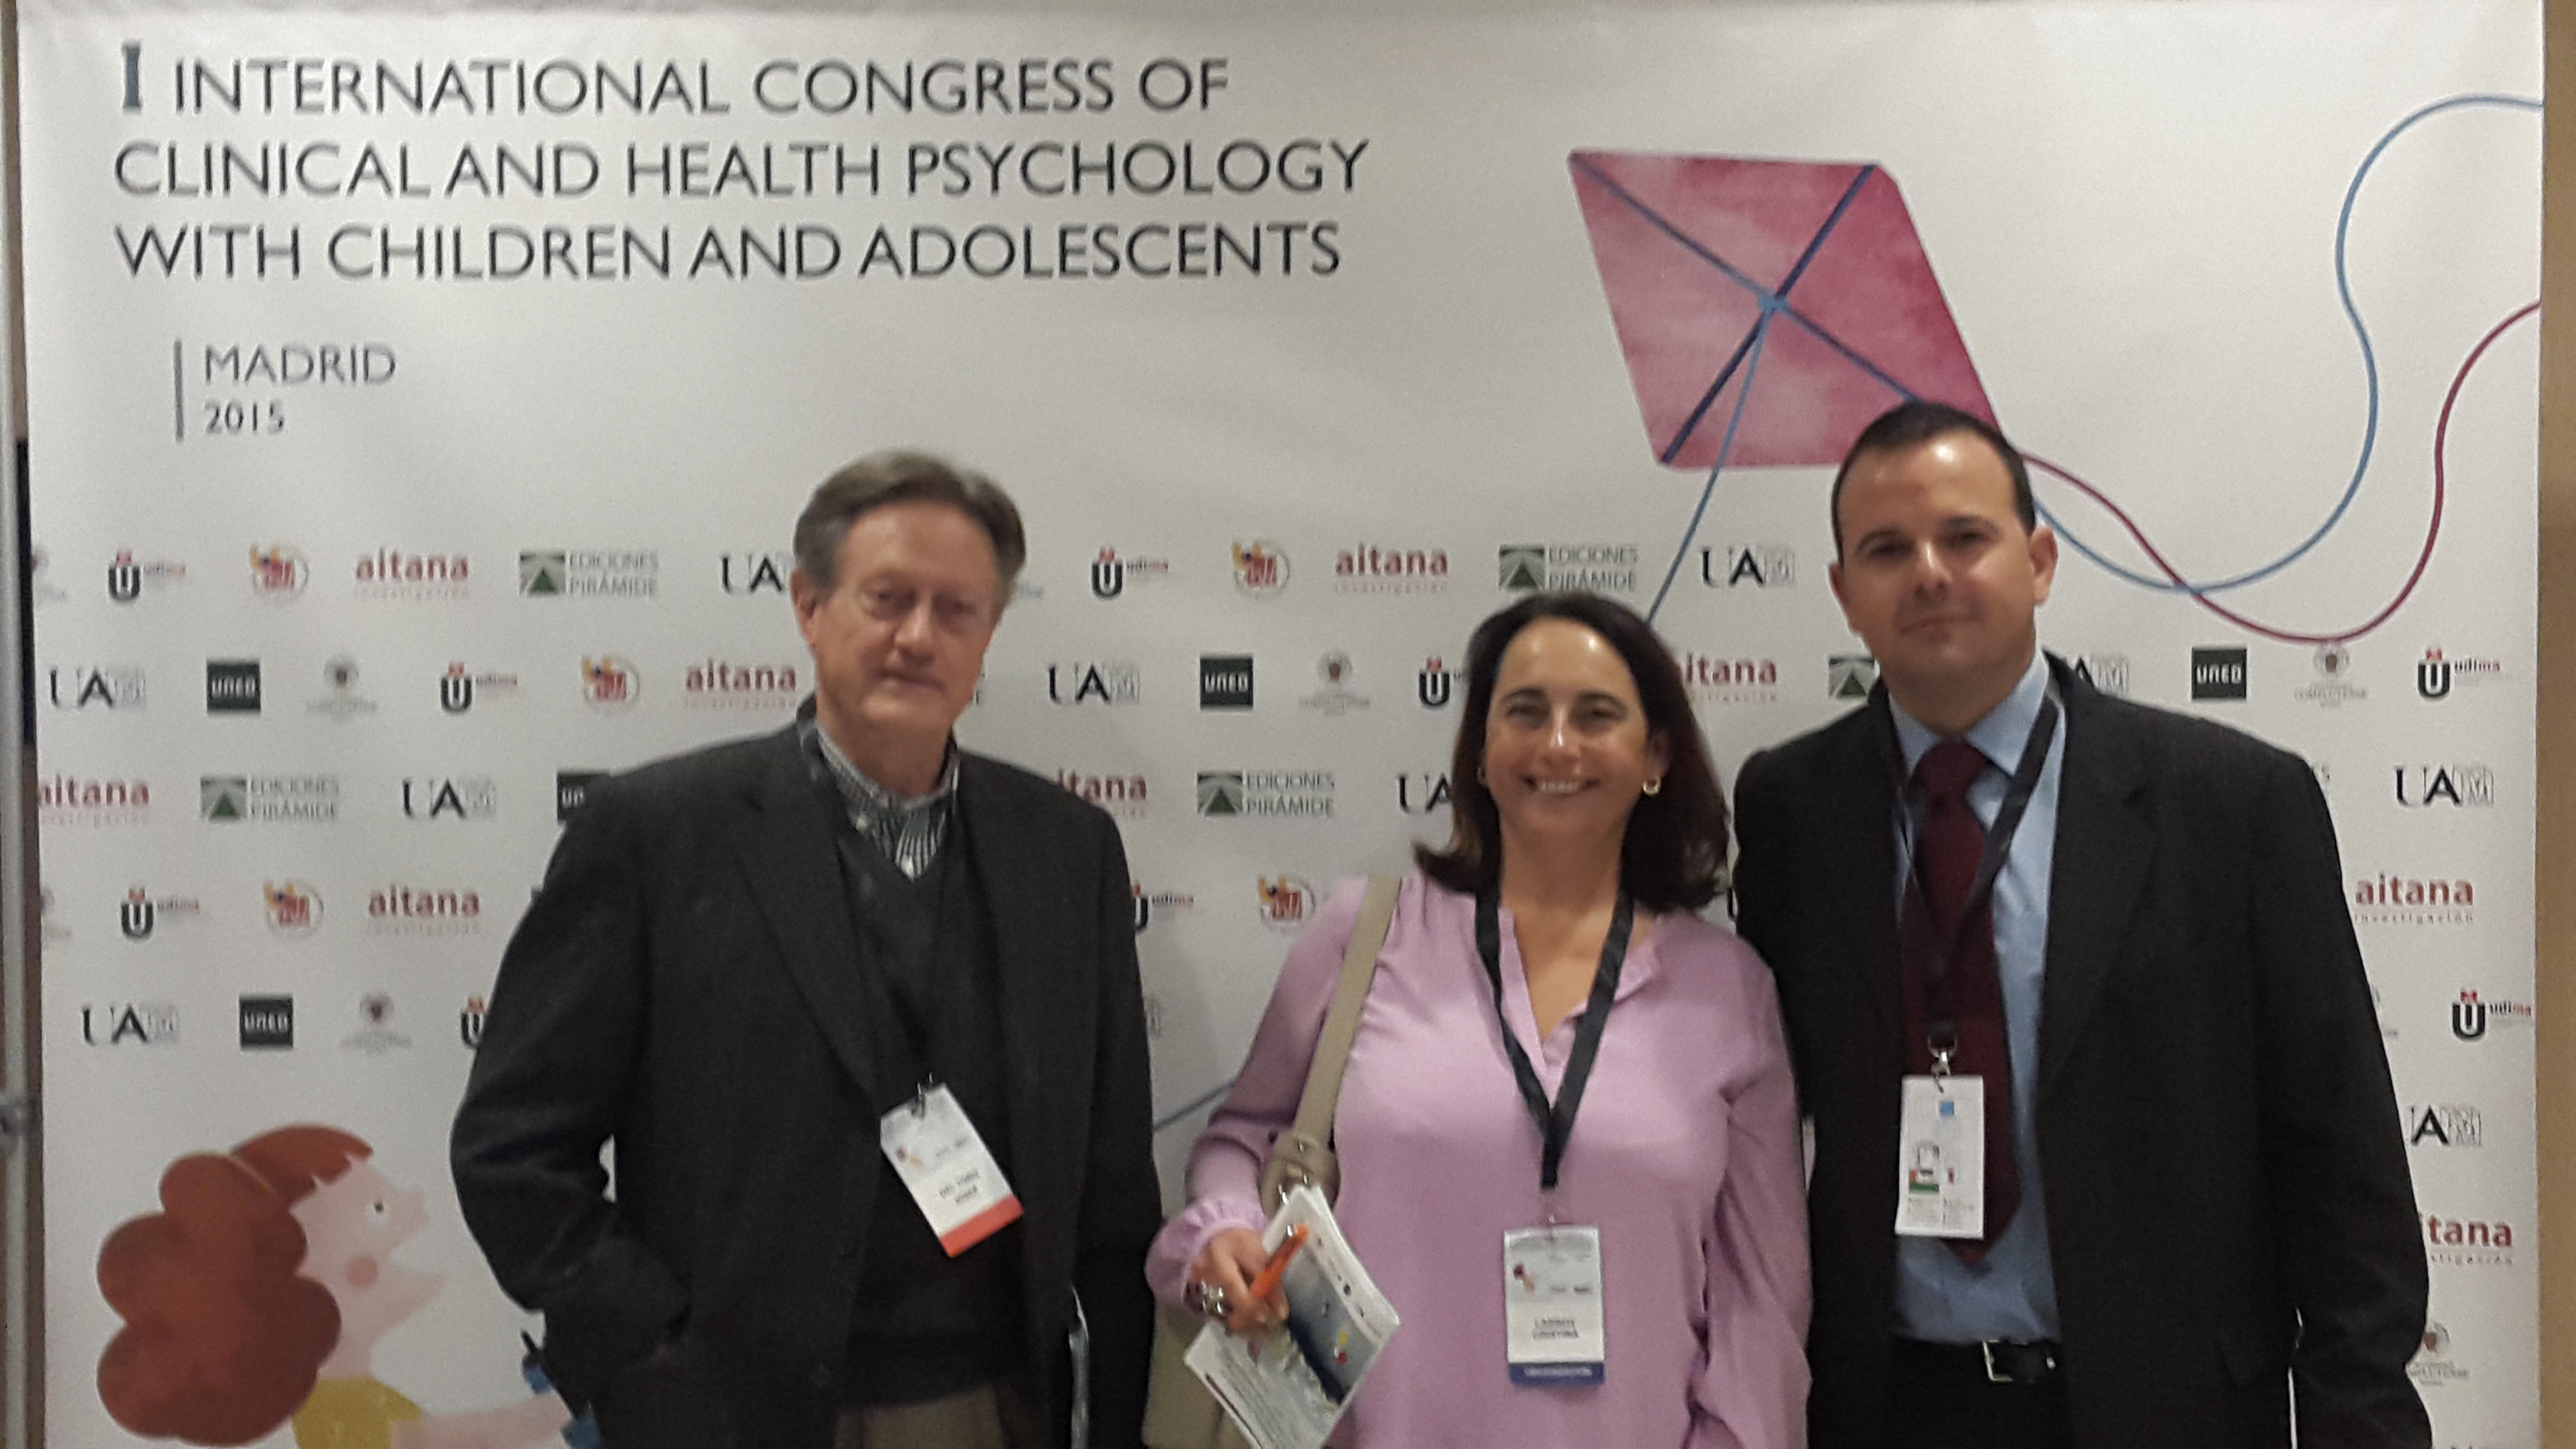 I International Congress of Clinical and Health Psychology with Children and Adolescents